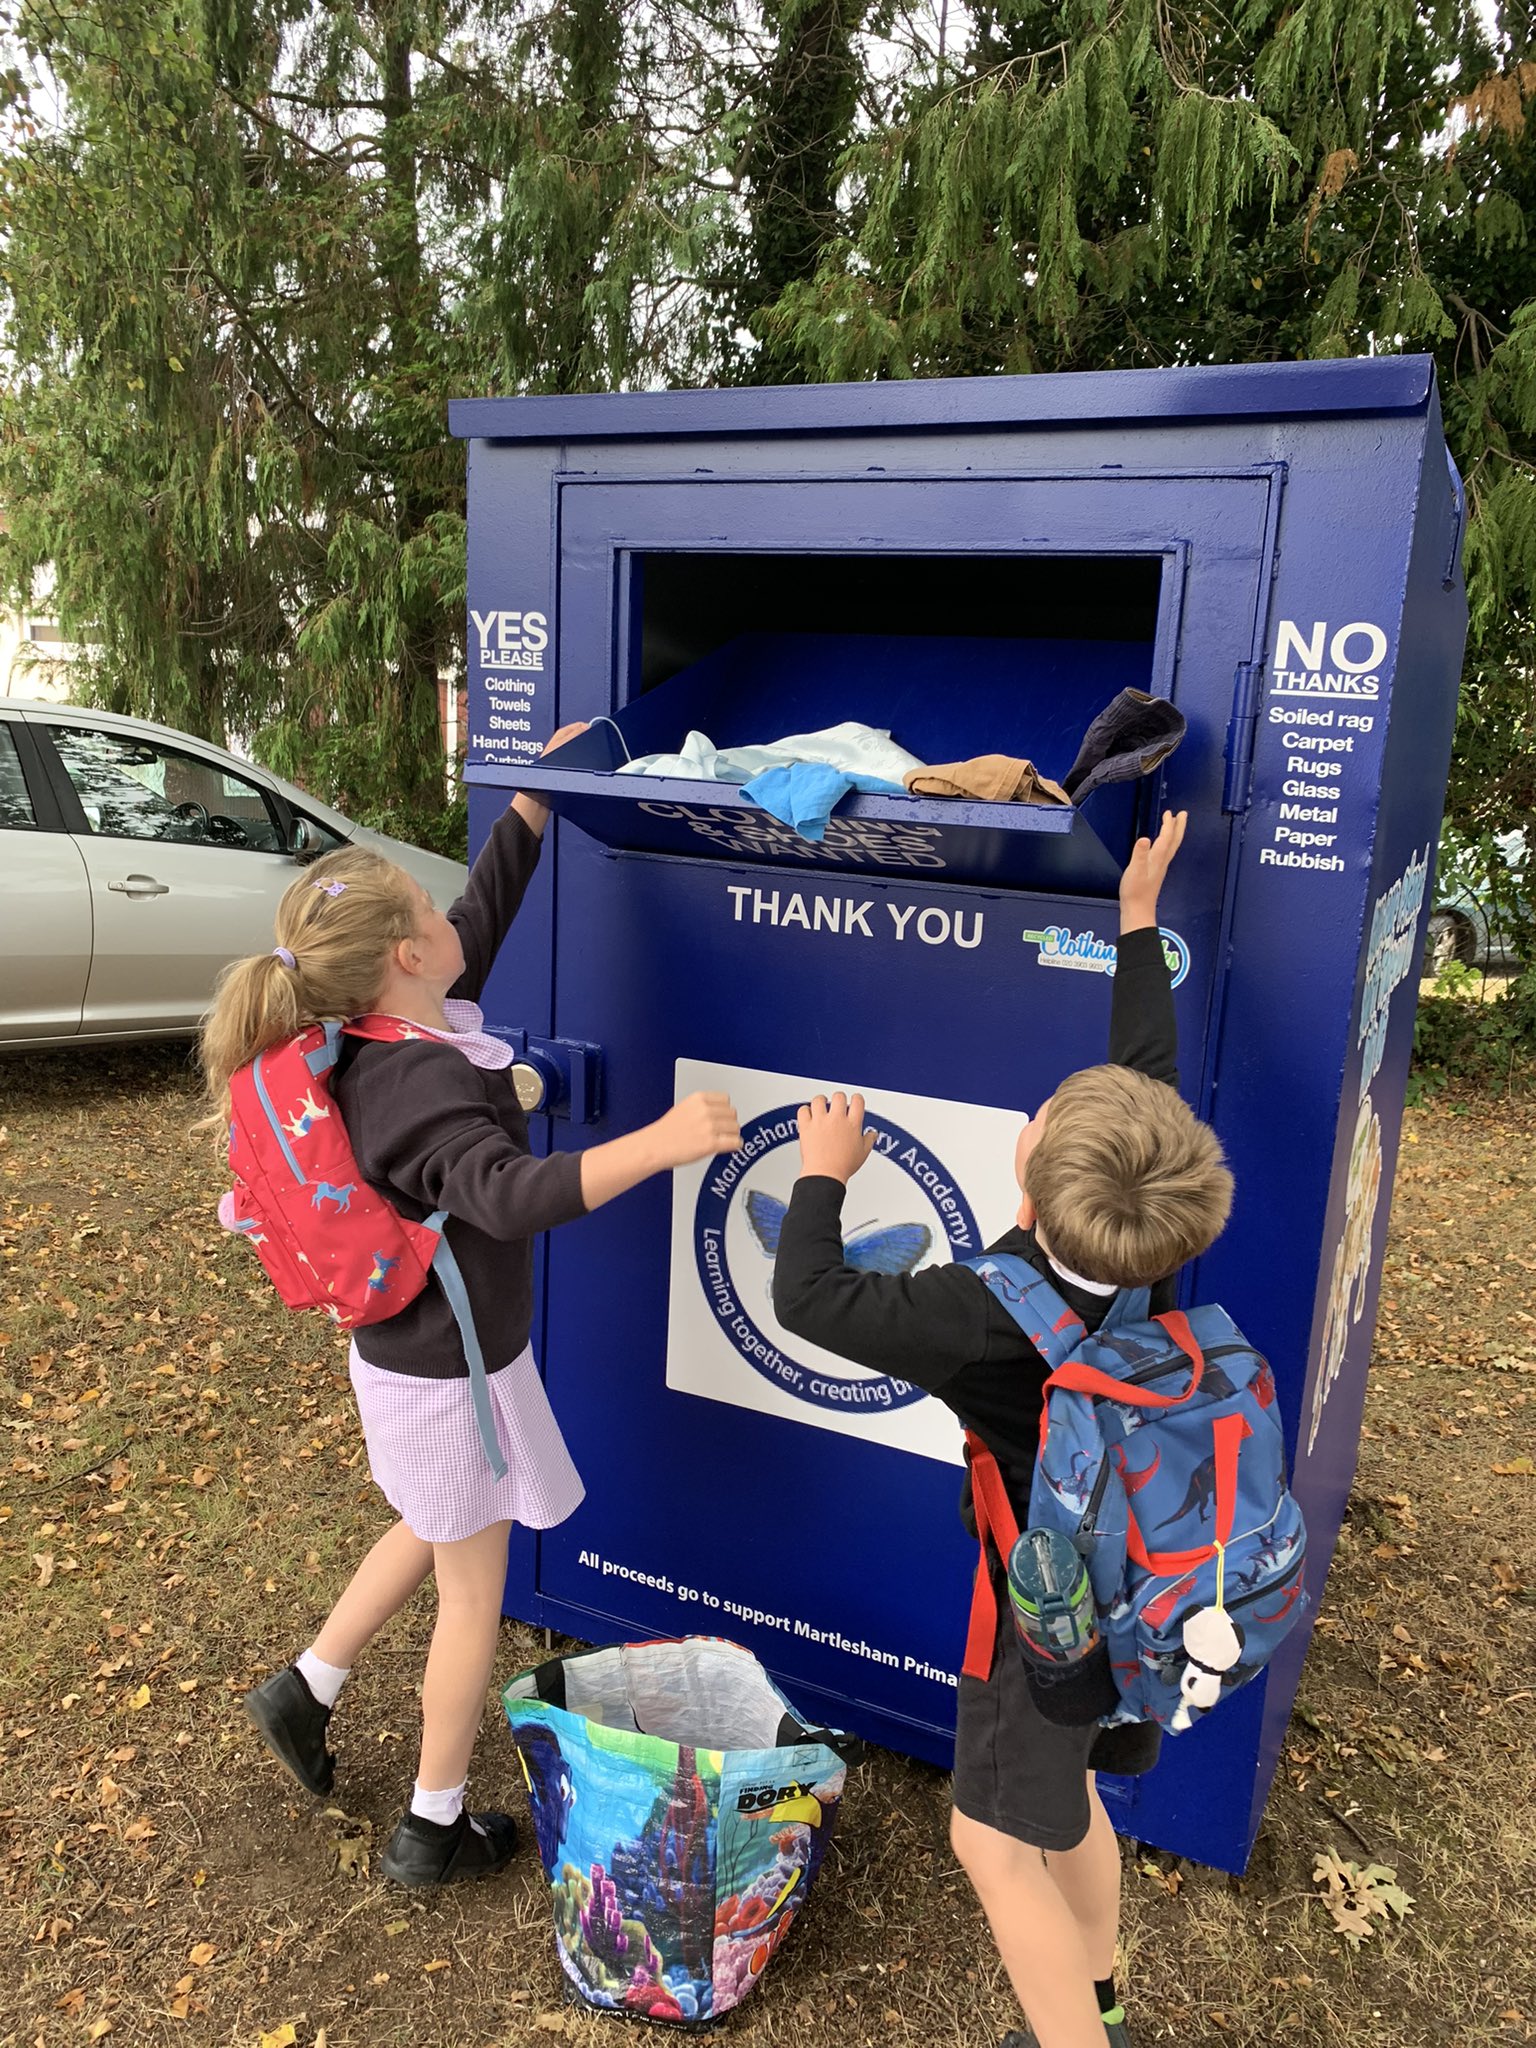 Clothes Recycling Bank